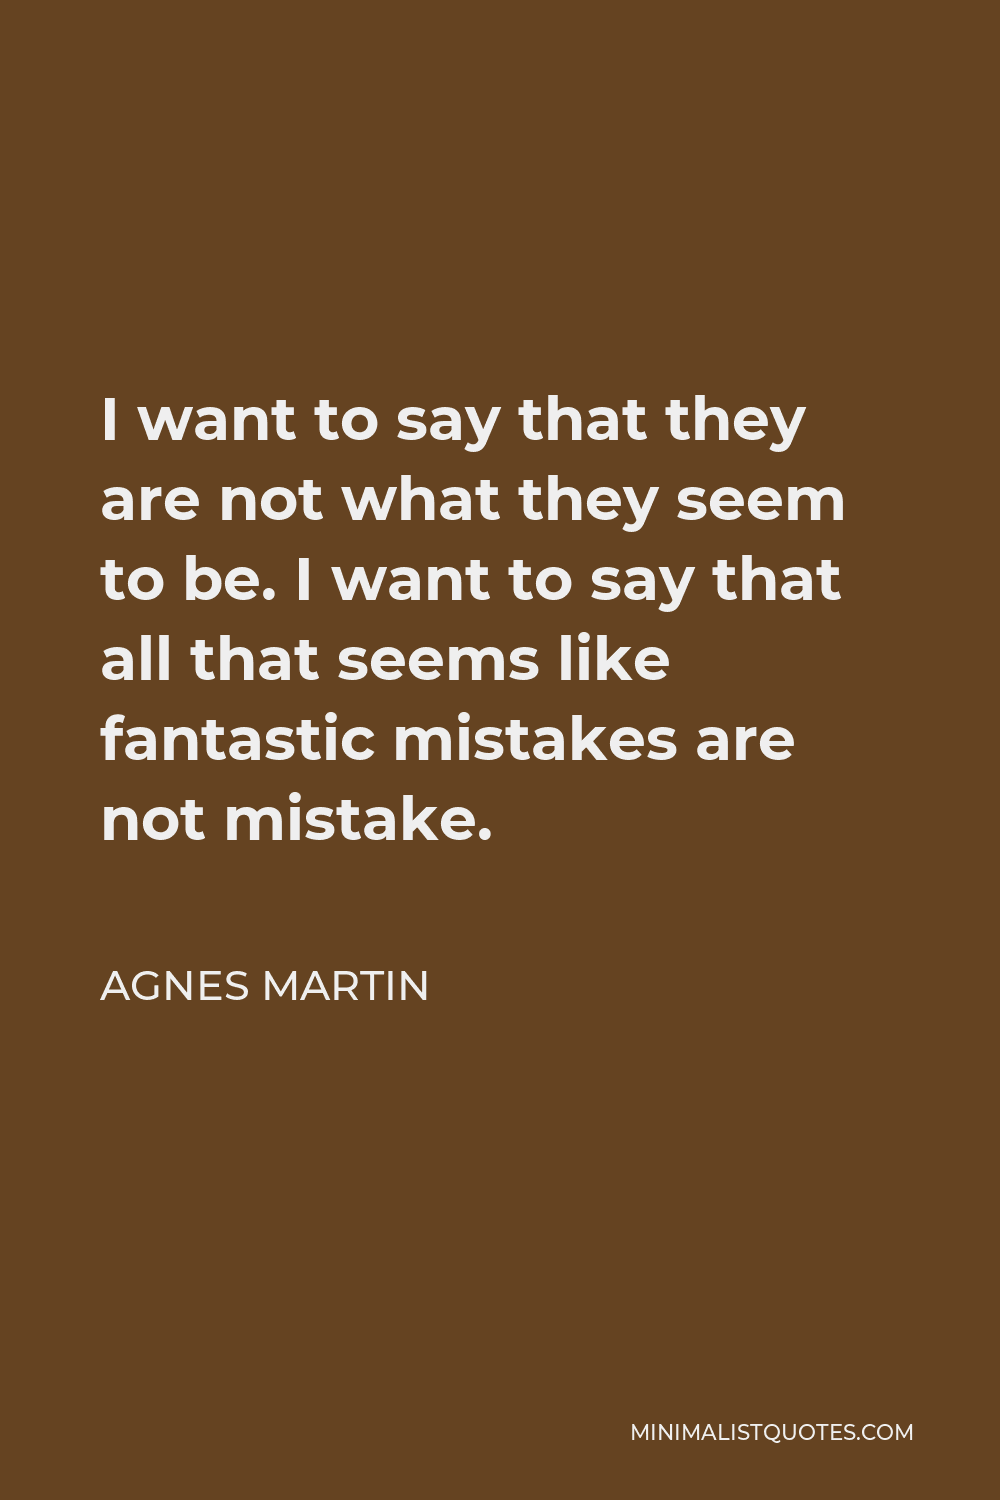 Agnes Martin Quote - I want to say that they are not what they seem to be. I want to say that all that seems like fantastic mistakes are not mistake.